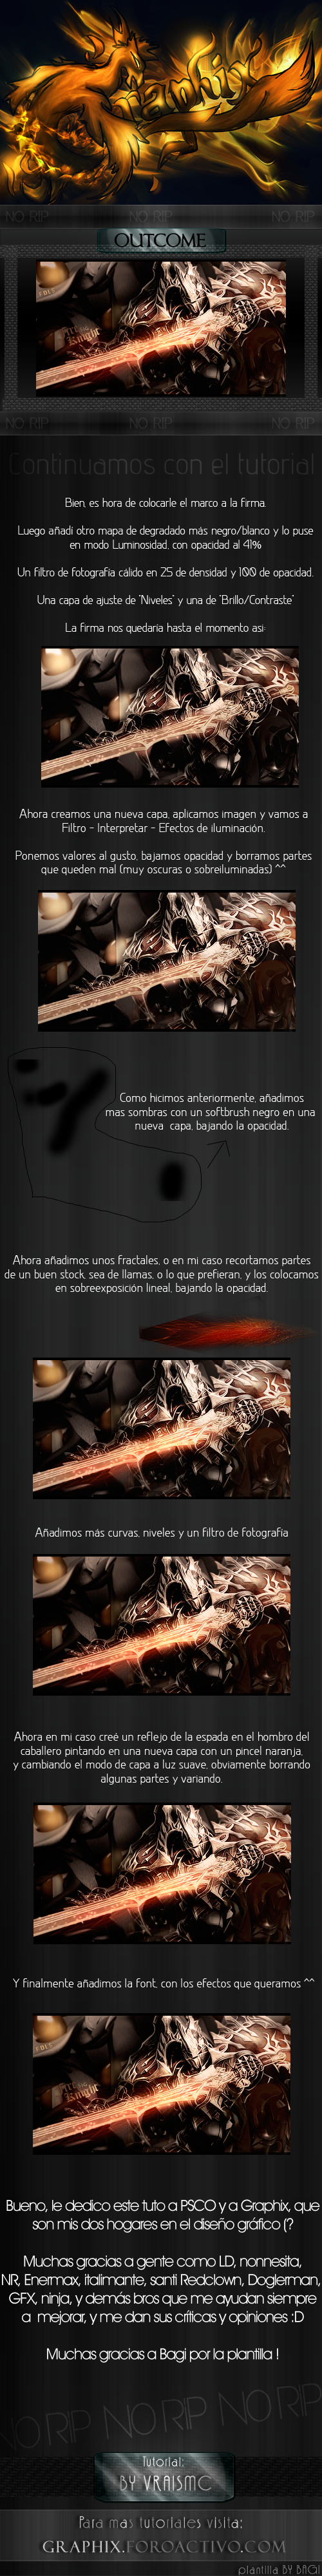 fire_knight_sig__tutorial_n_3_by_vraismc-d36gj86.png